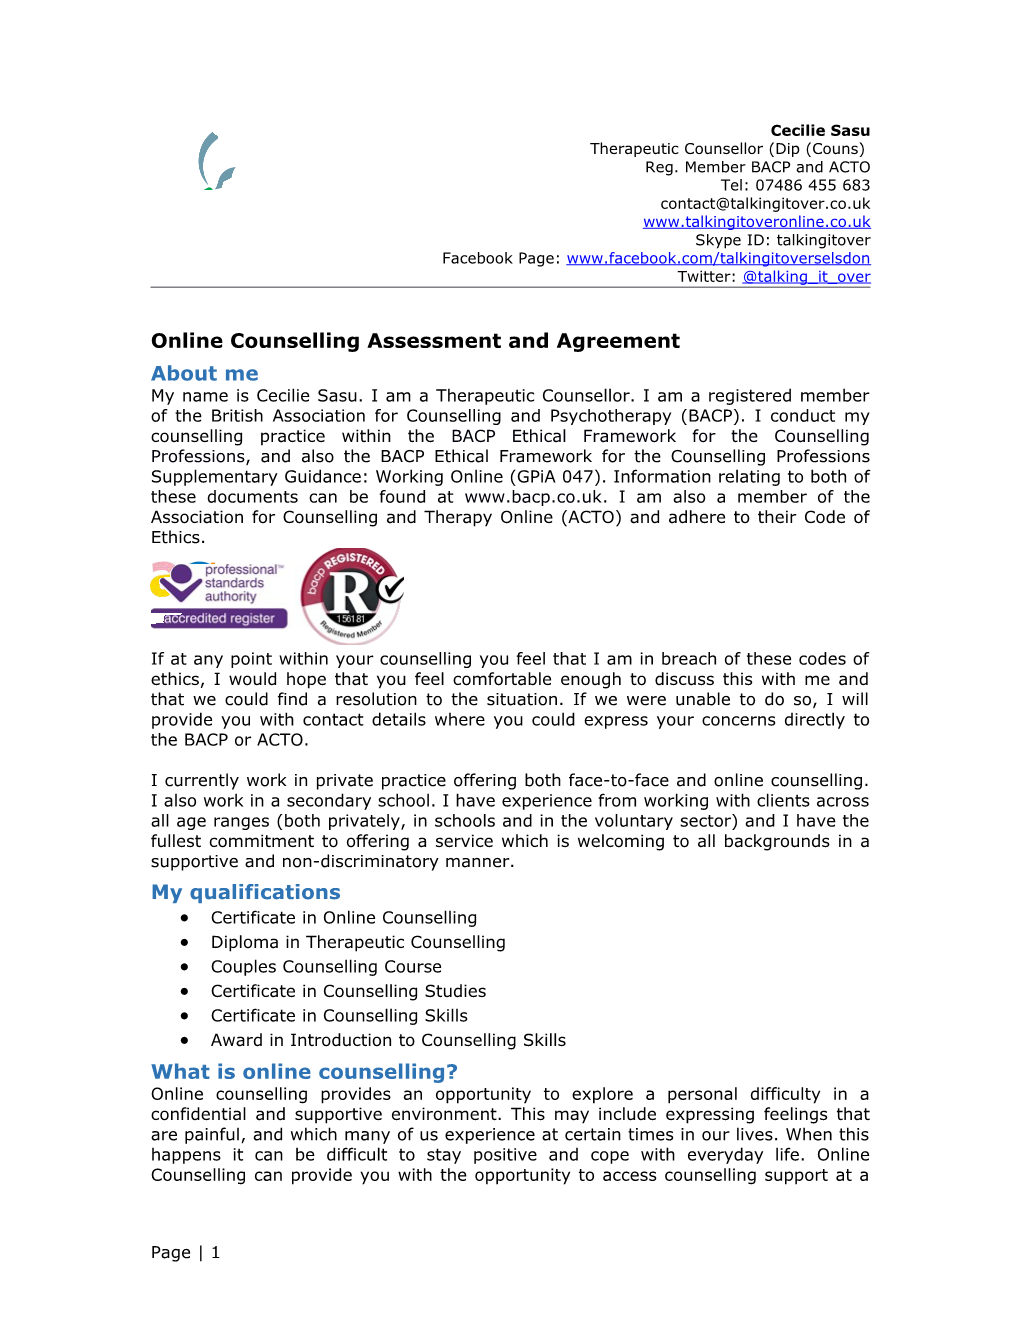 Online Counselling Agreement